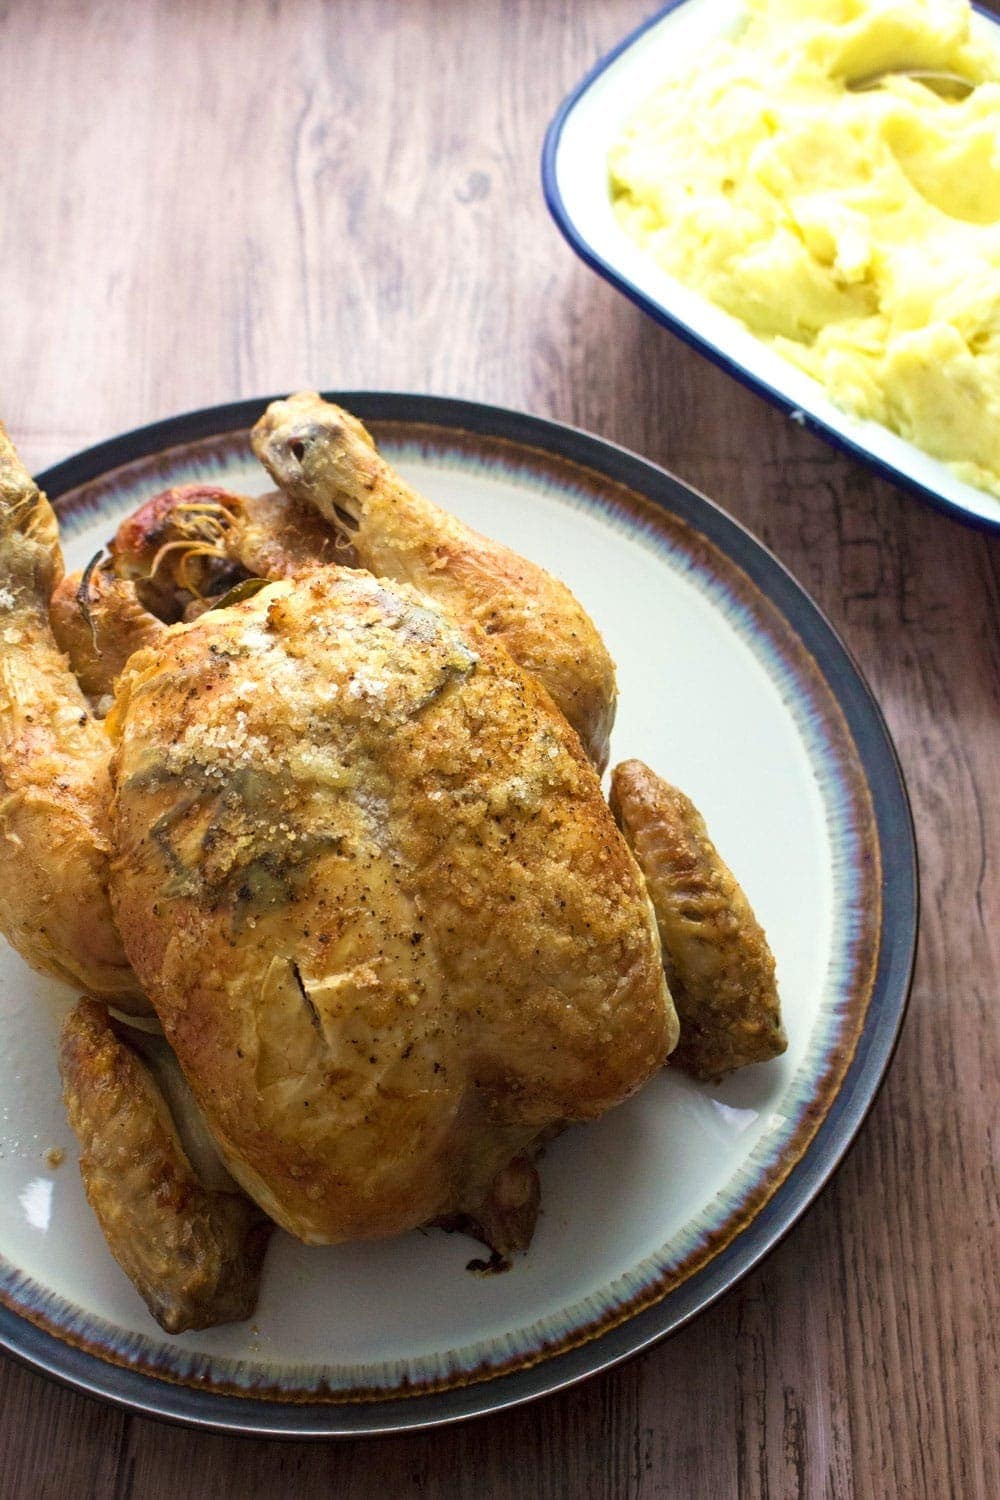 This deliciously succulent roast chicken is flavoured with rosemary, lemon and garlic. Rub the skin with butter and salt to get it extra crispy!